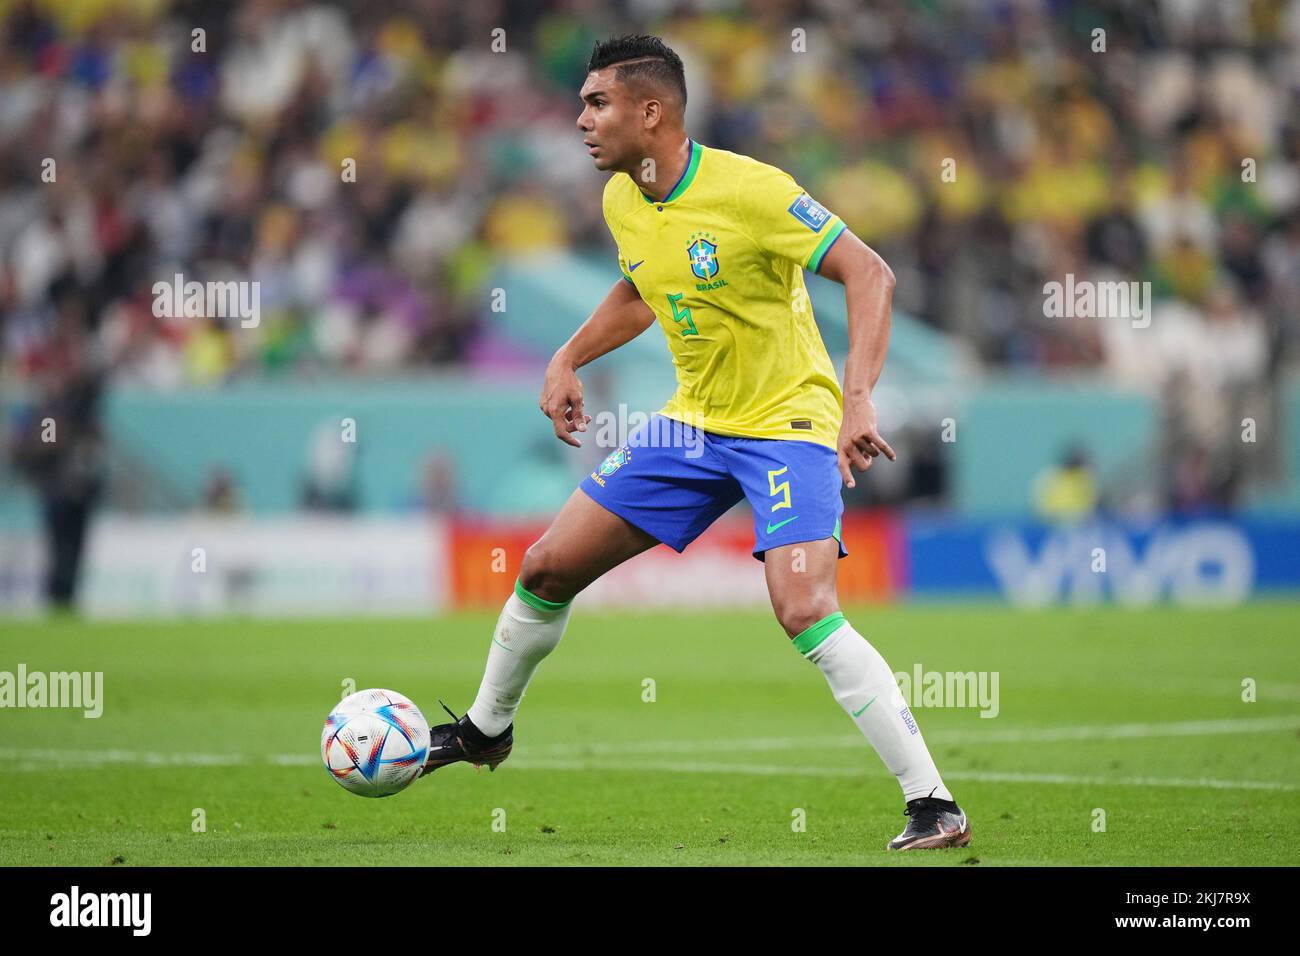 Carlos Henrique Casemiro of Brazil during the FIFA World Cup Qatar 2022 match, Group G, between Brazil and Serbia played at Lusail Stadium on Nov 24, 2022 in Lusail, Qatar. (Photo by Bagu Blanco / PRESSIN) Credit: PRESSINPHOTO SPORTS AGENCY/Alamy Live News Stock Photo